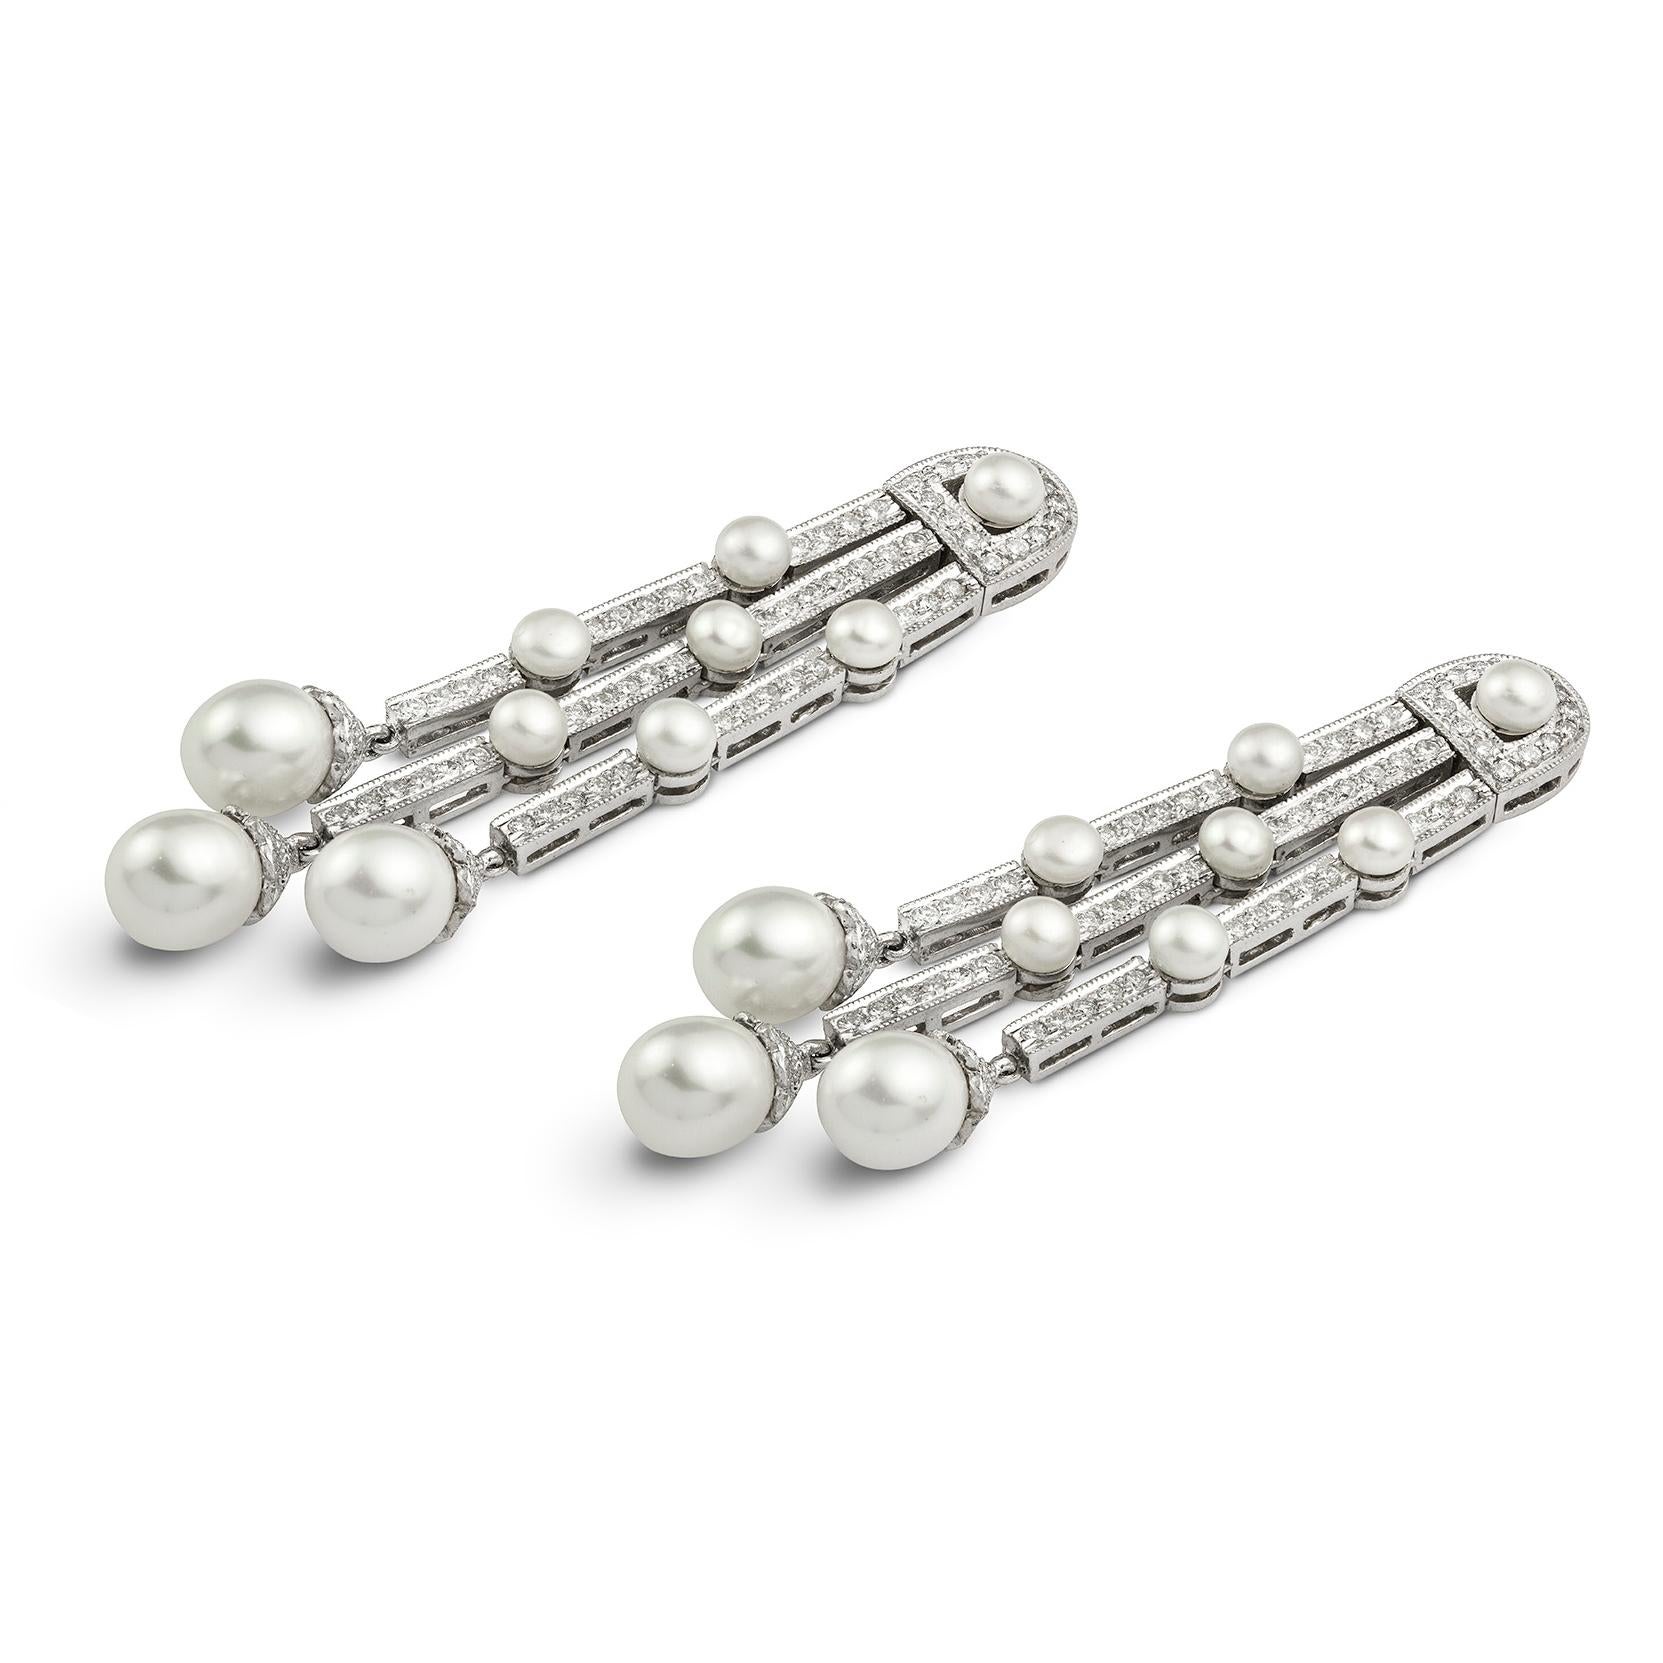 A pair of diamond and cultured pearl drop earrings, each earring of a three graduated pendant drops set with round brilliant-cut diamonds and six cultured bouton pearls each terminated by a cultured pear shape pearl with a diamond-set cap, suspended